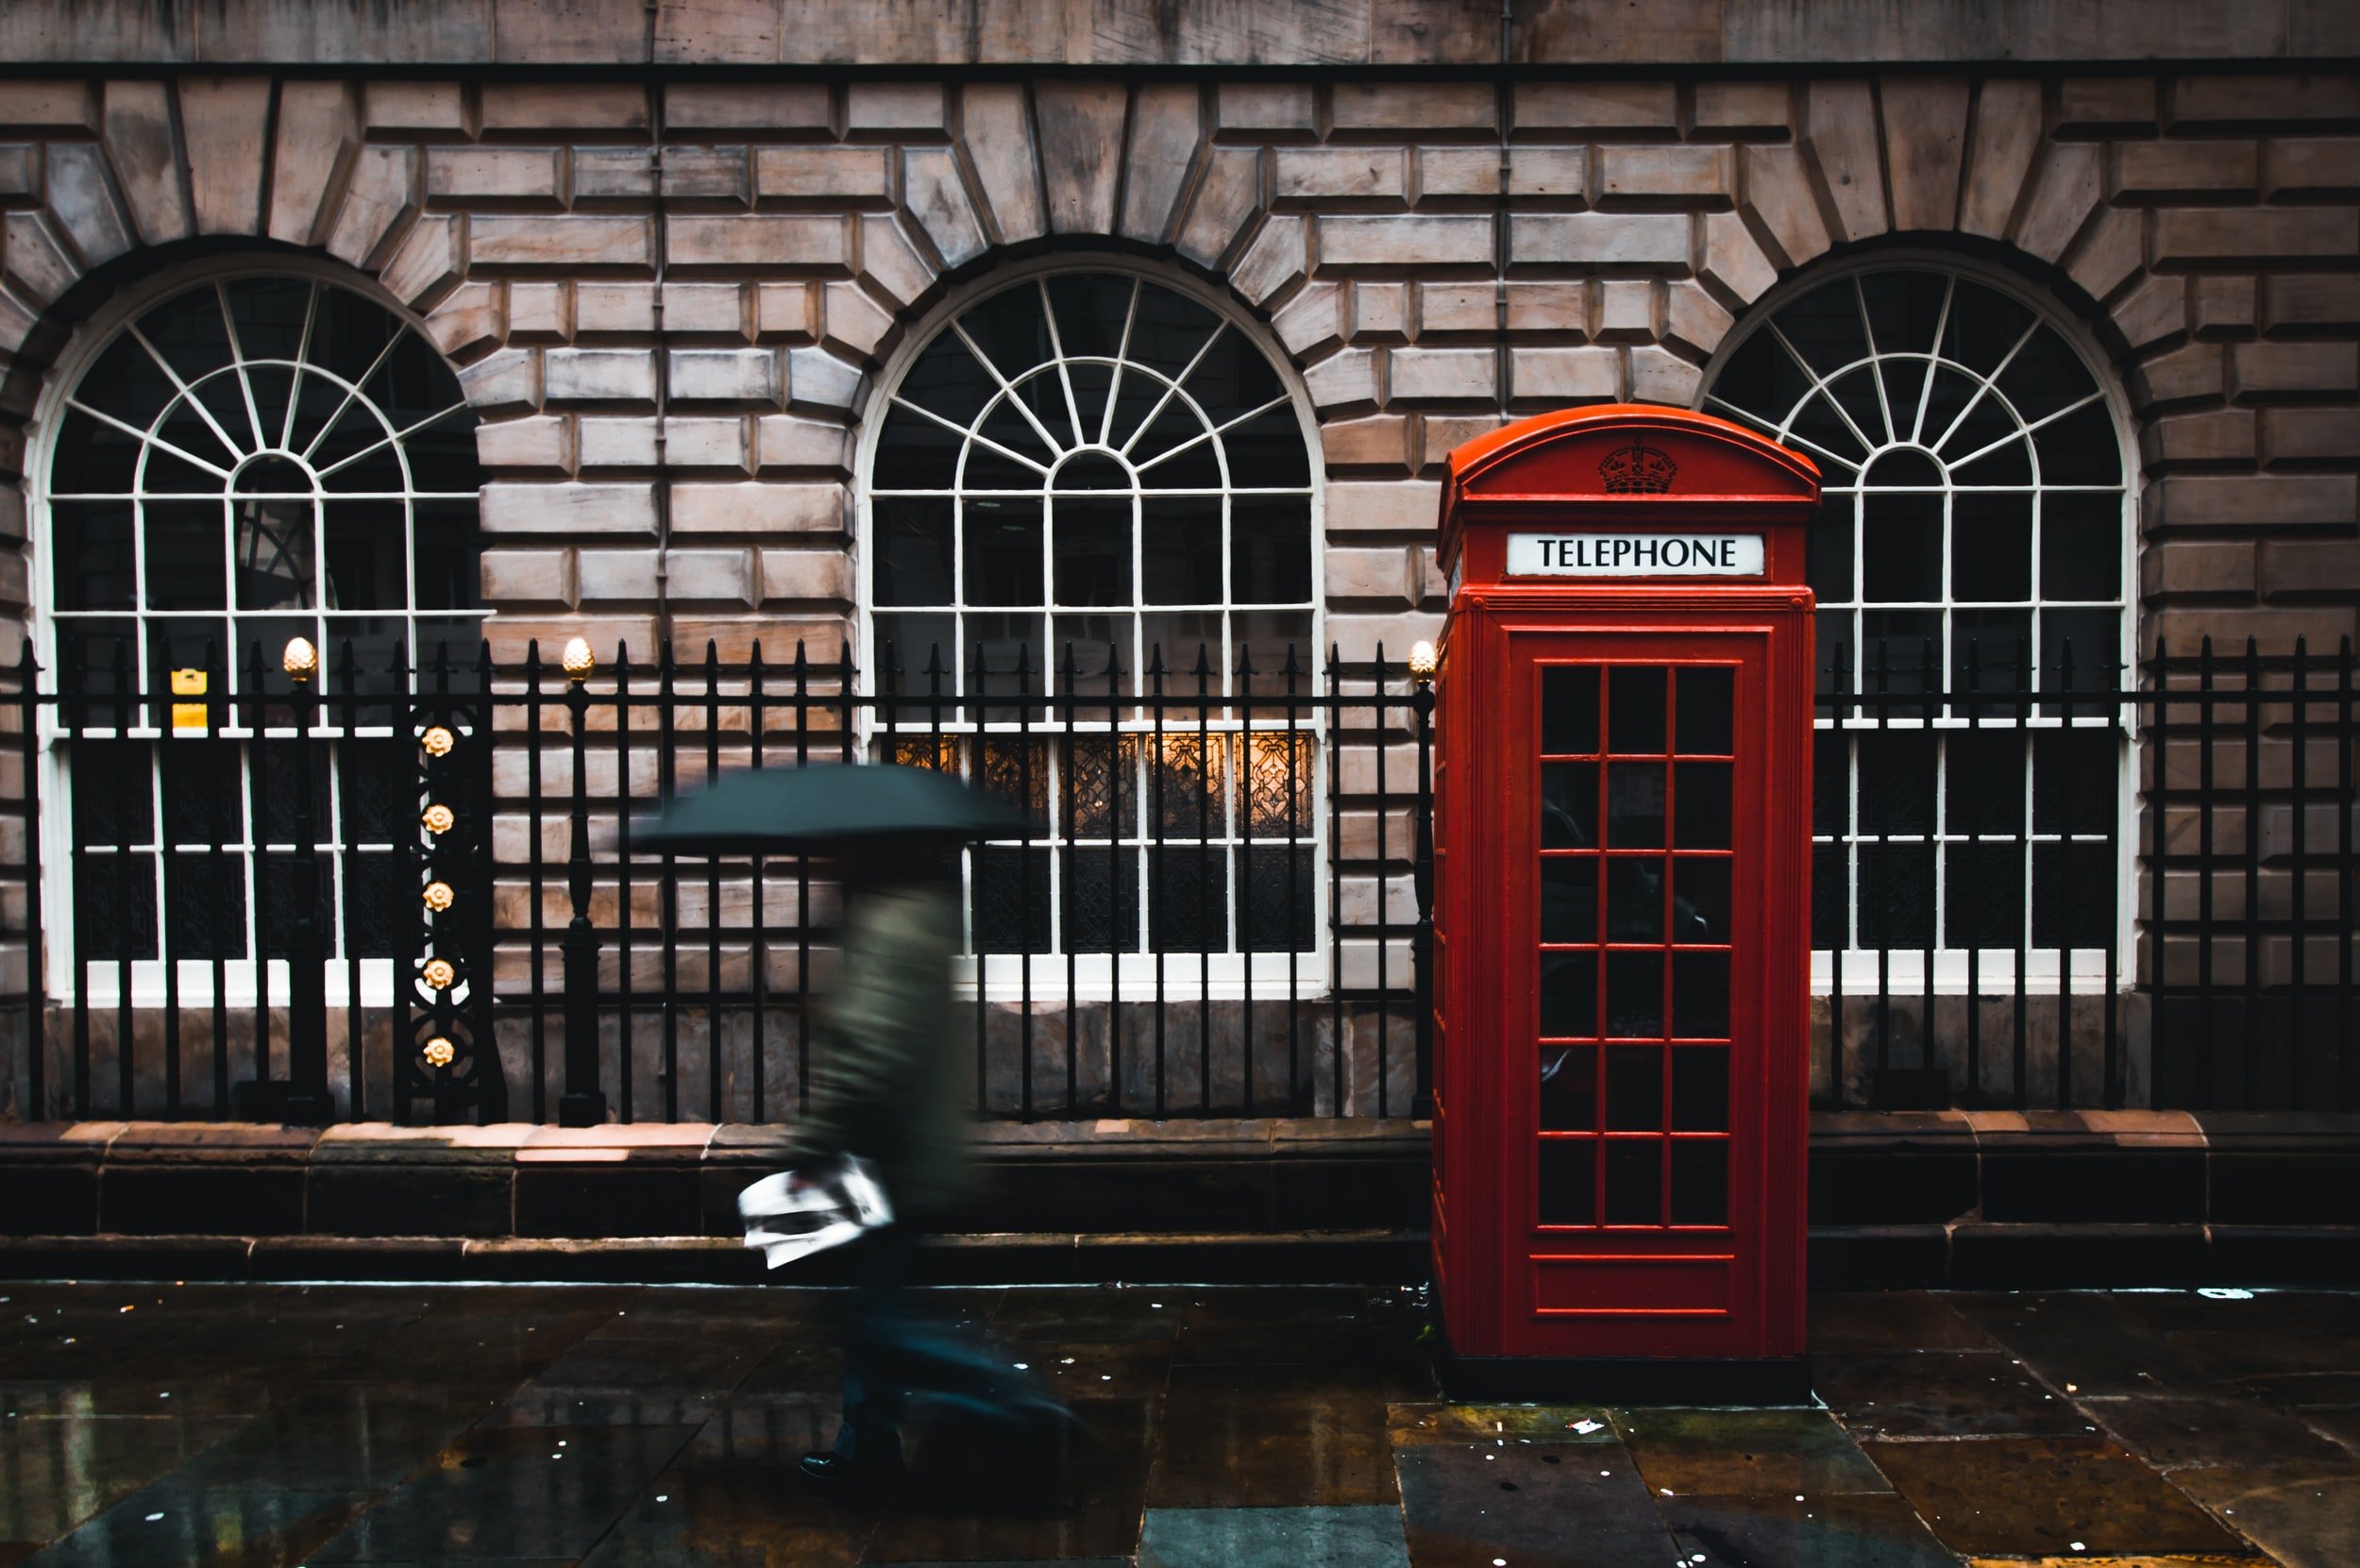 Red telephone booth in London, England